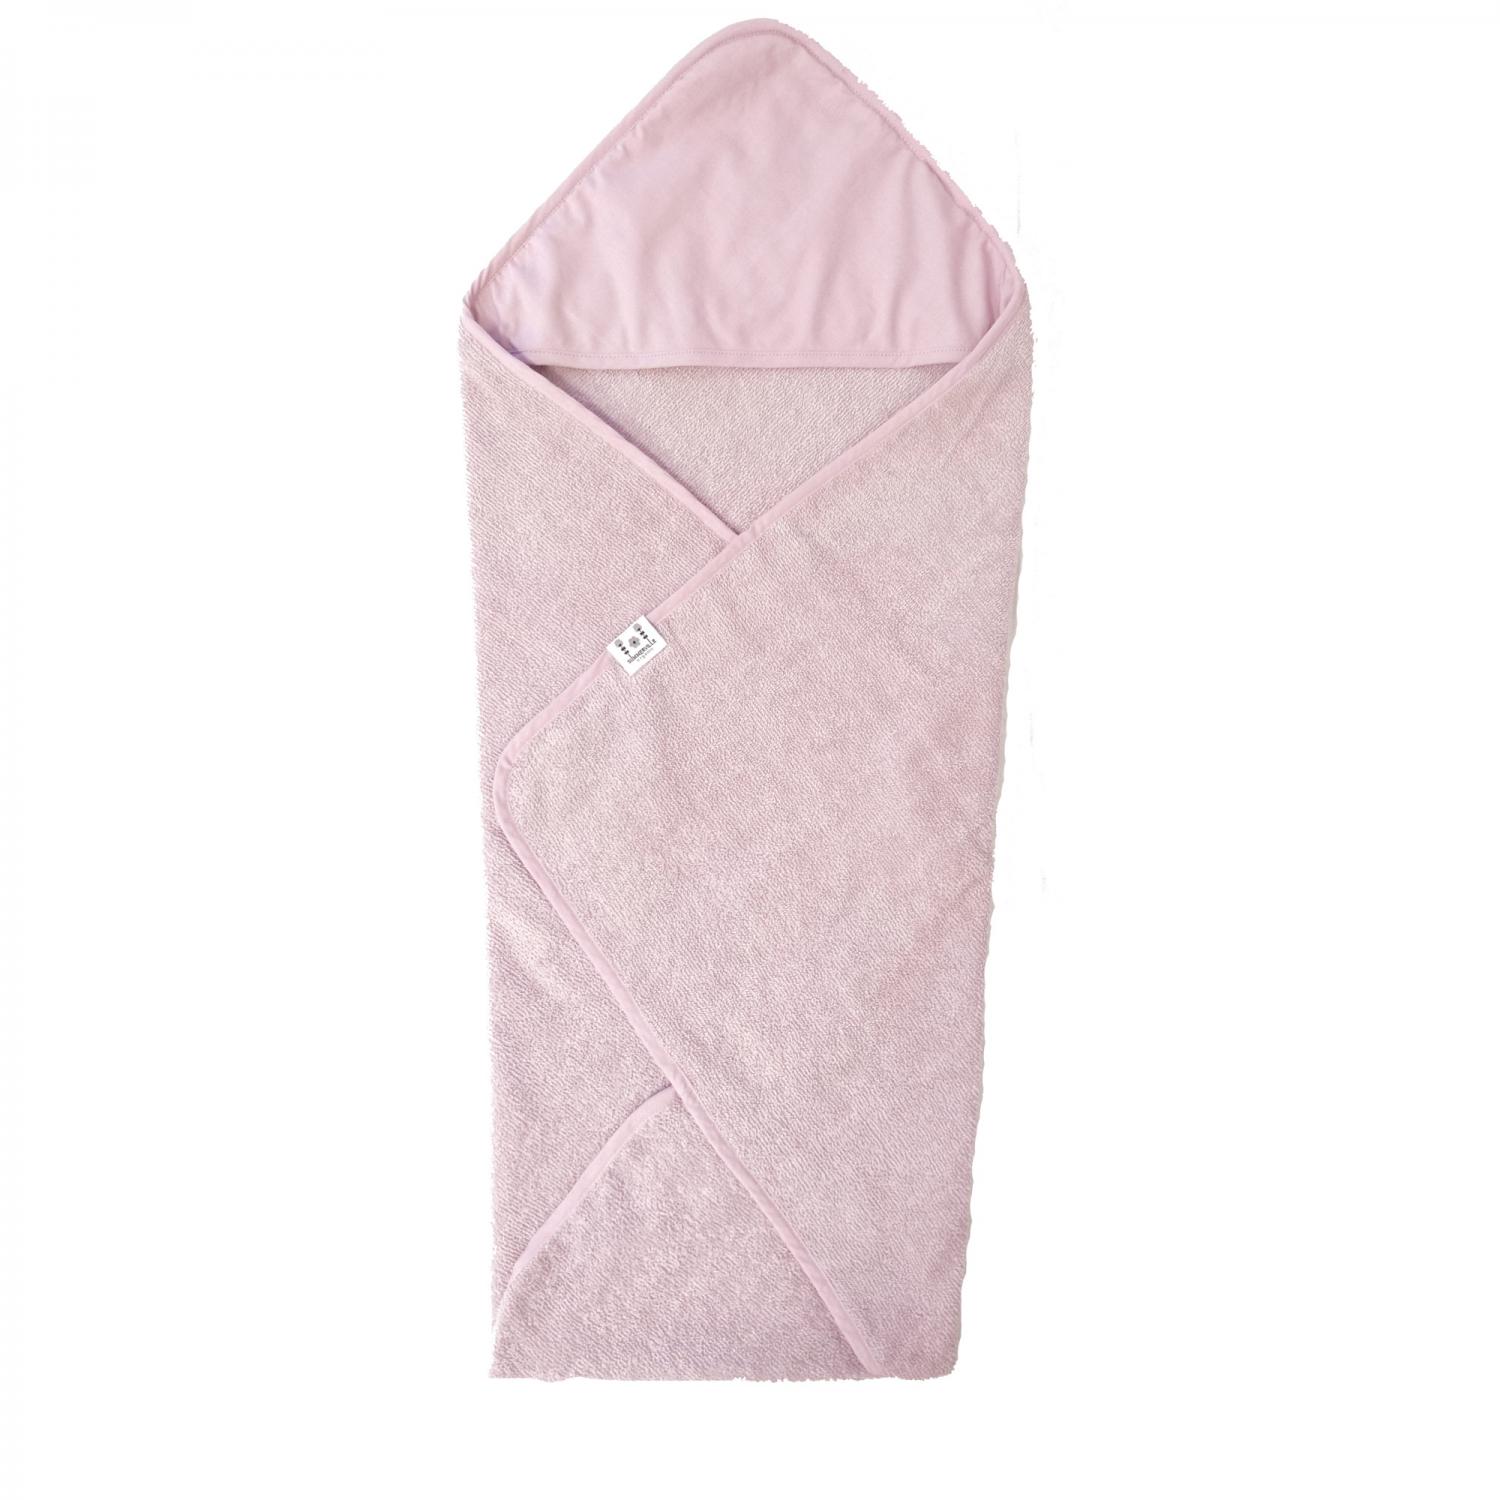 Hooded towel style pink GOTS